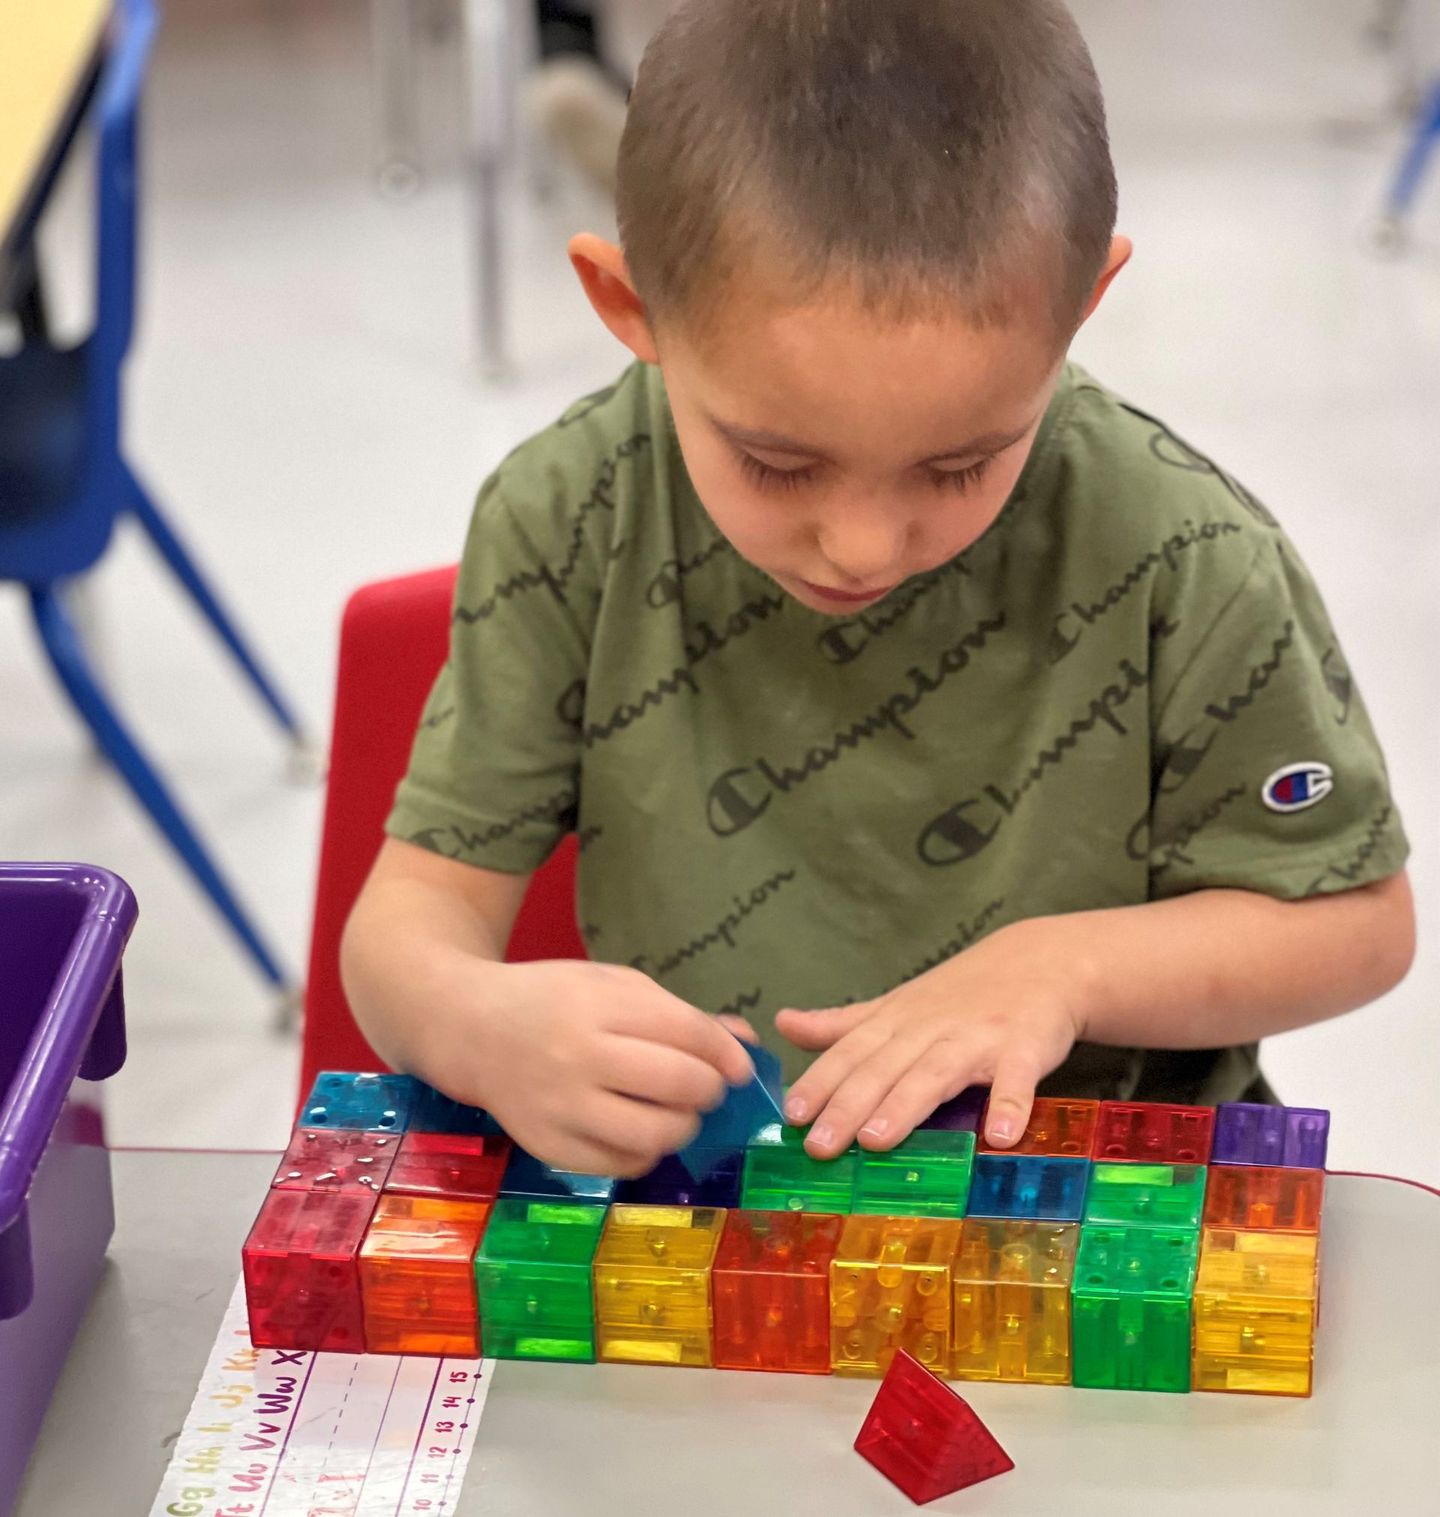 a young boy wearing a champion shirt is playing with blocks